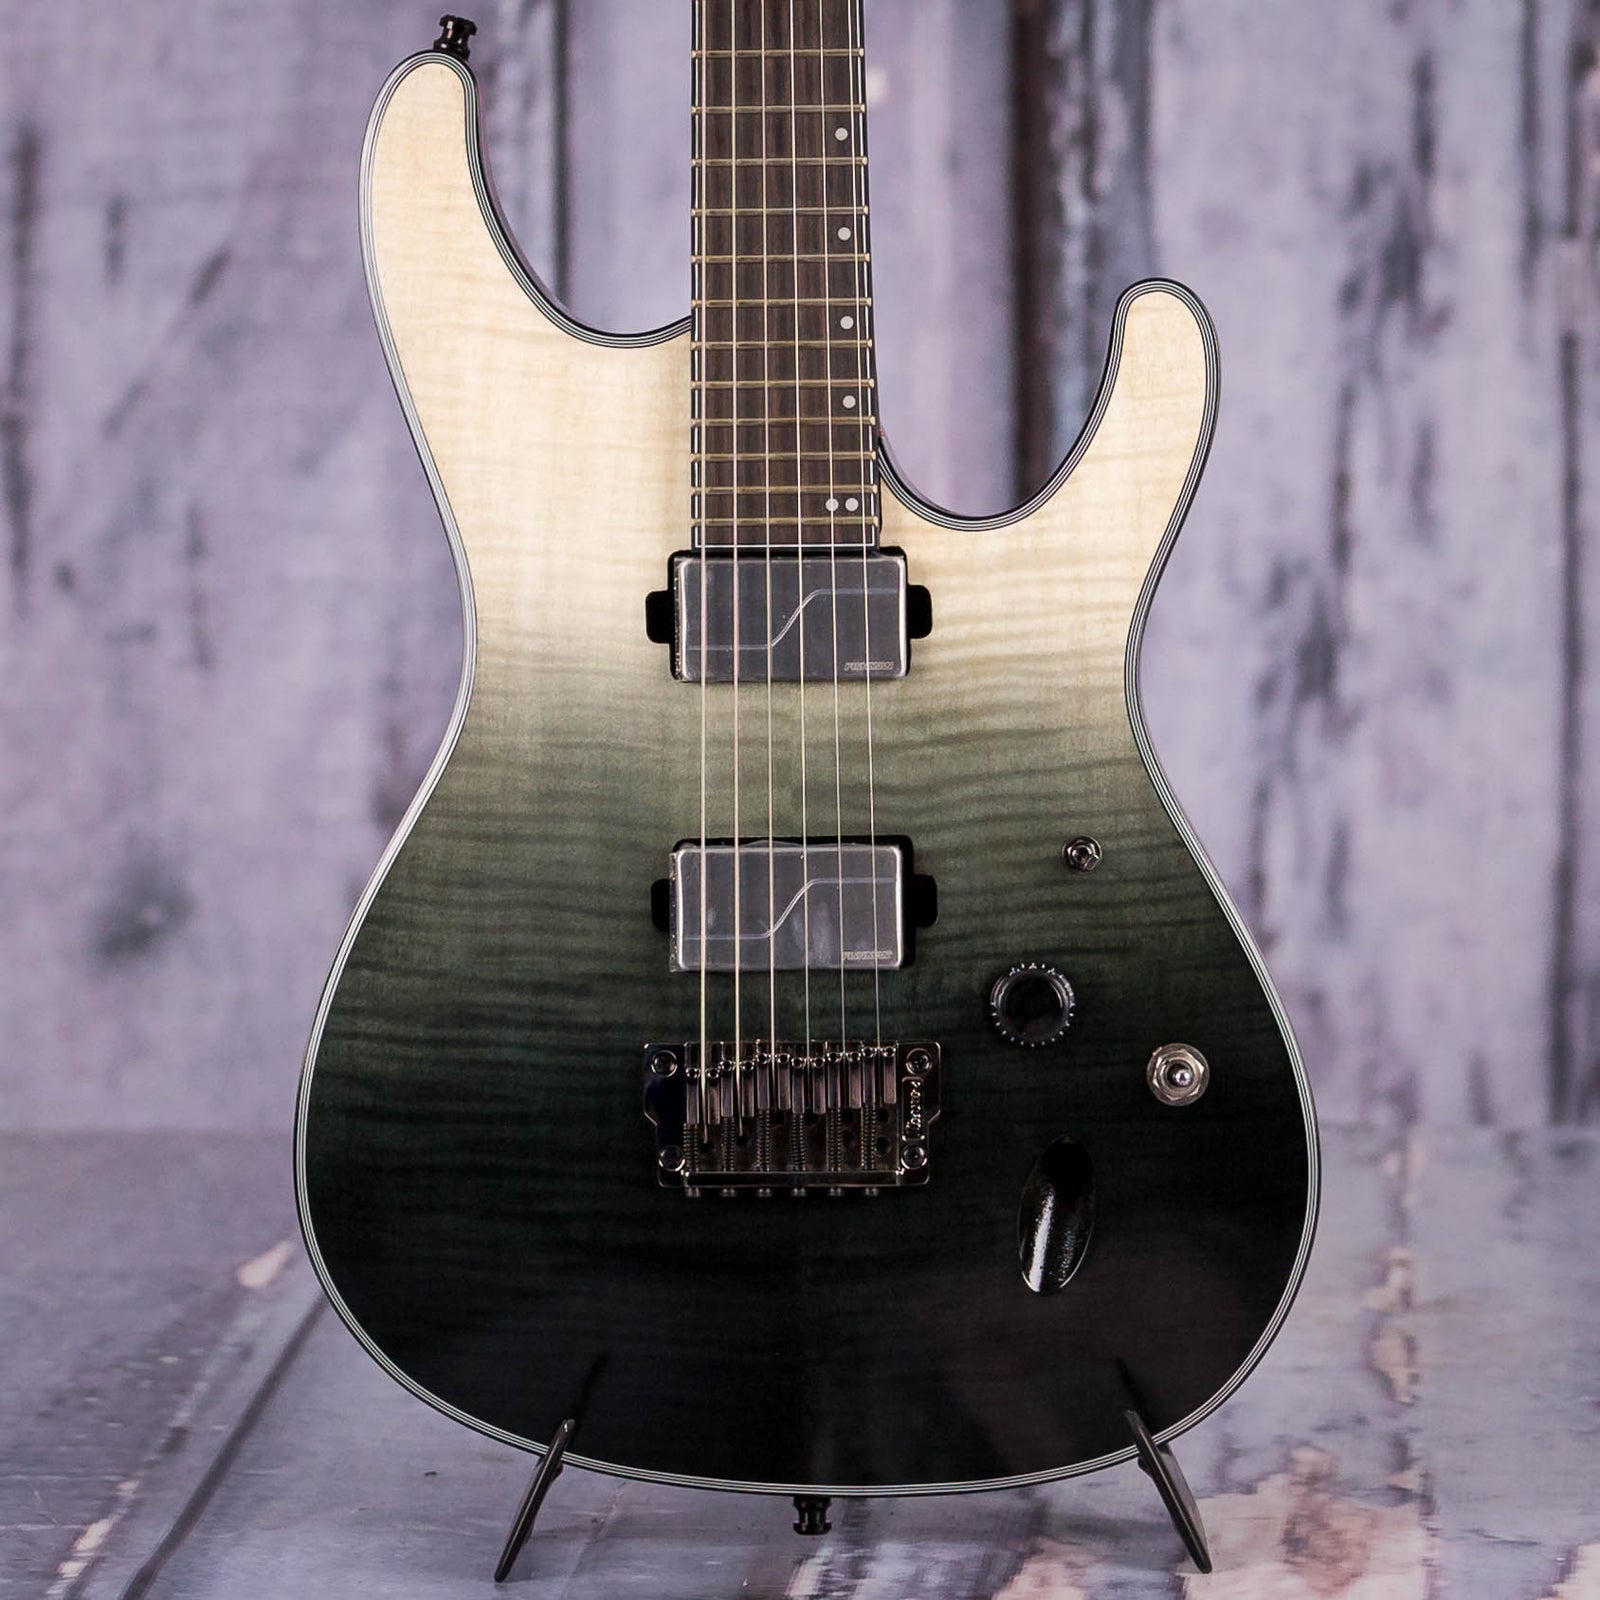 Ibanez Axion Label S61AL, Black Mirage Gradiation Low Gloss | For Sale